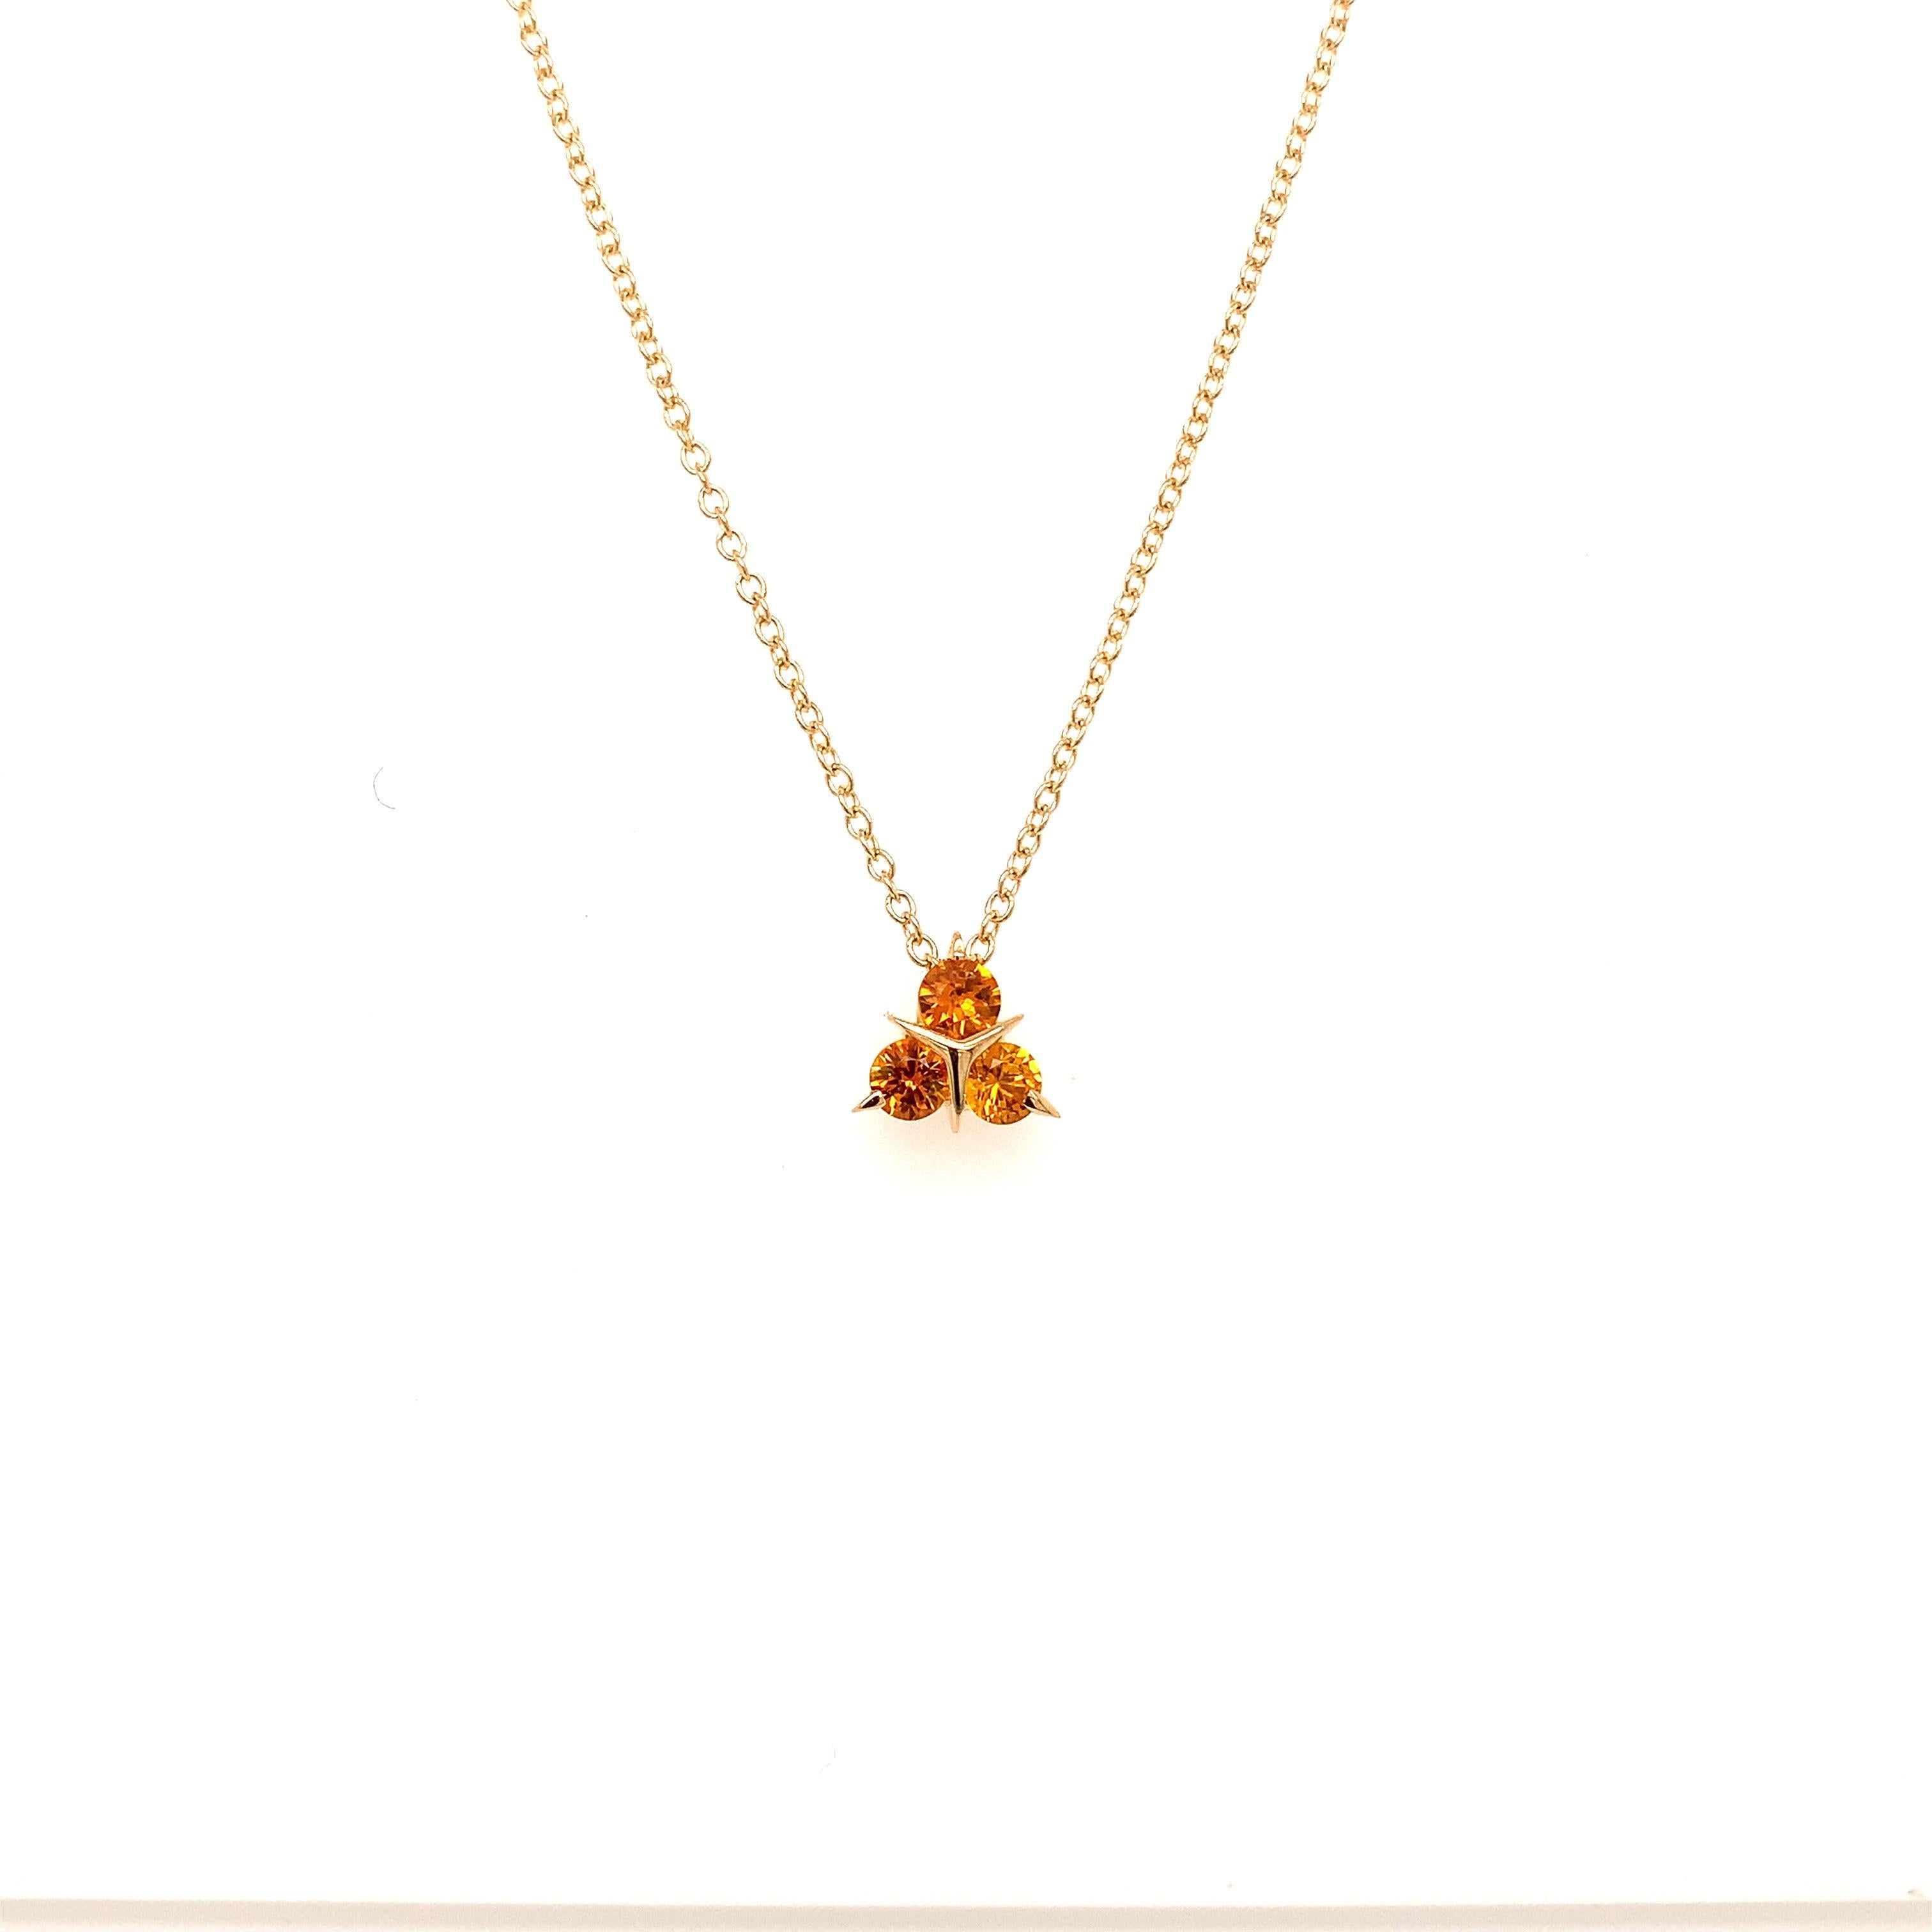 Contemporary 18 Karat Yellow Gold Yellow Sapphires Garavelli Pendant with Chain For Sale